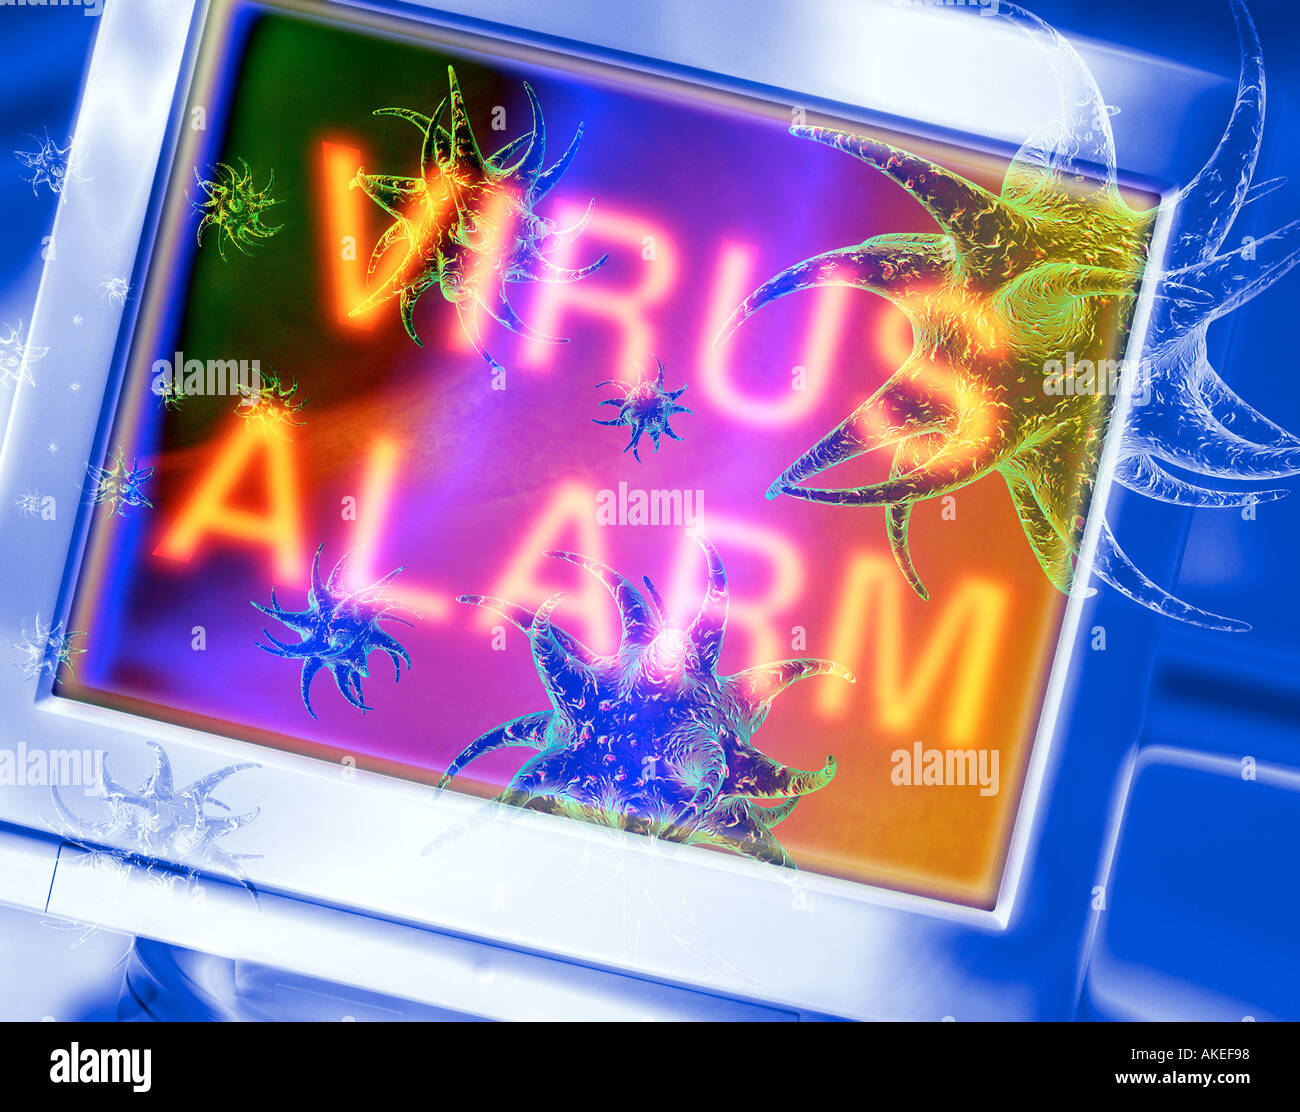 attack with computer virus computer software warning of electronical warfare danger alarm Stock Photo